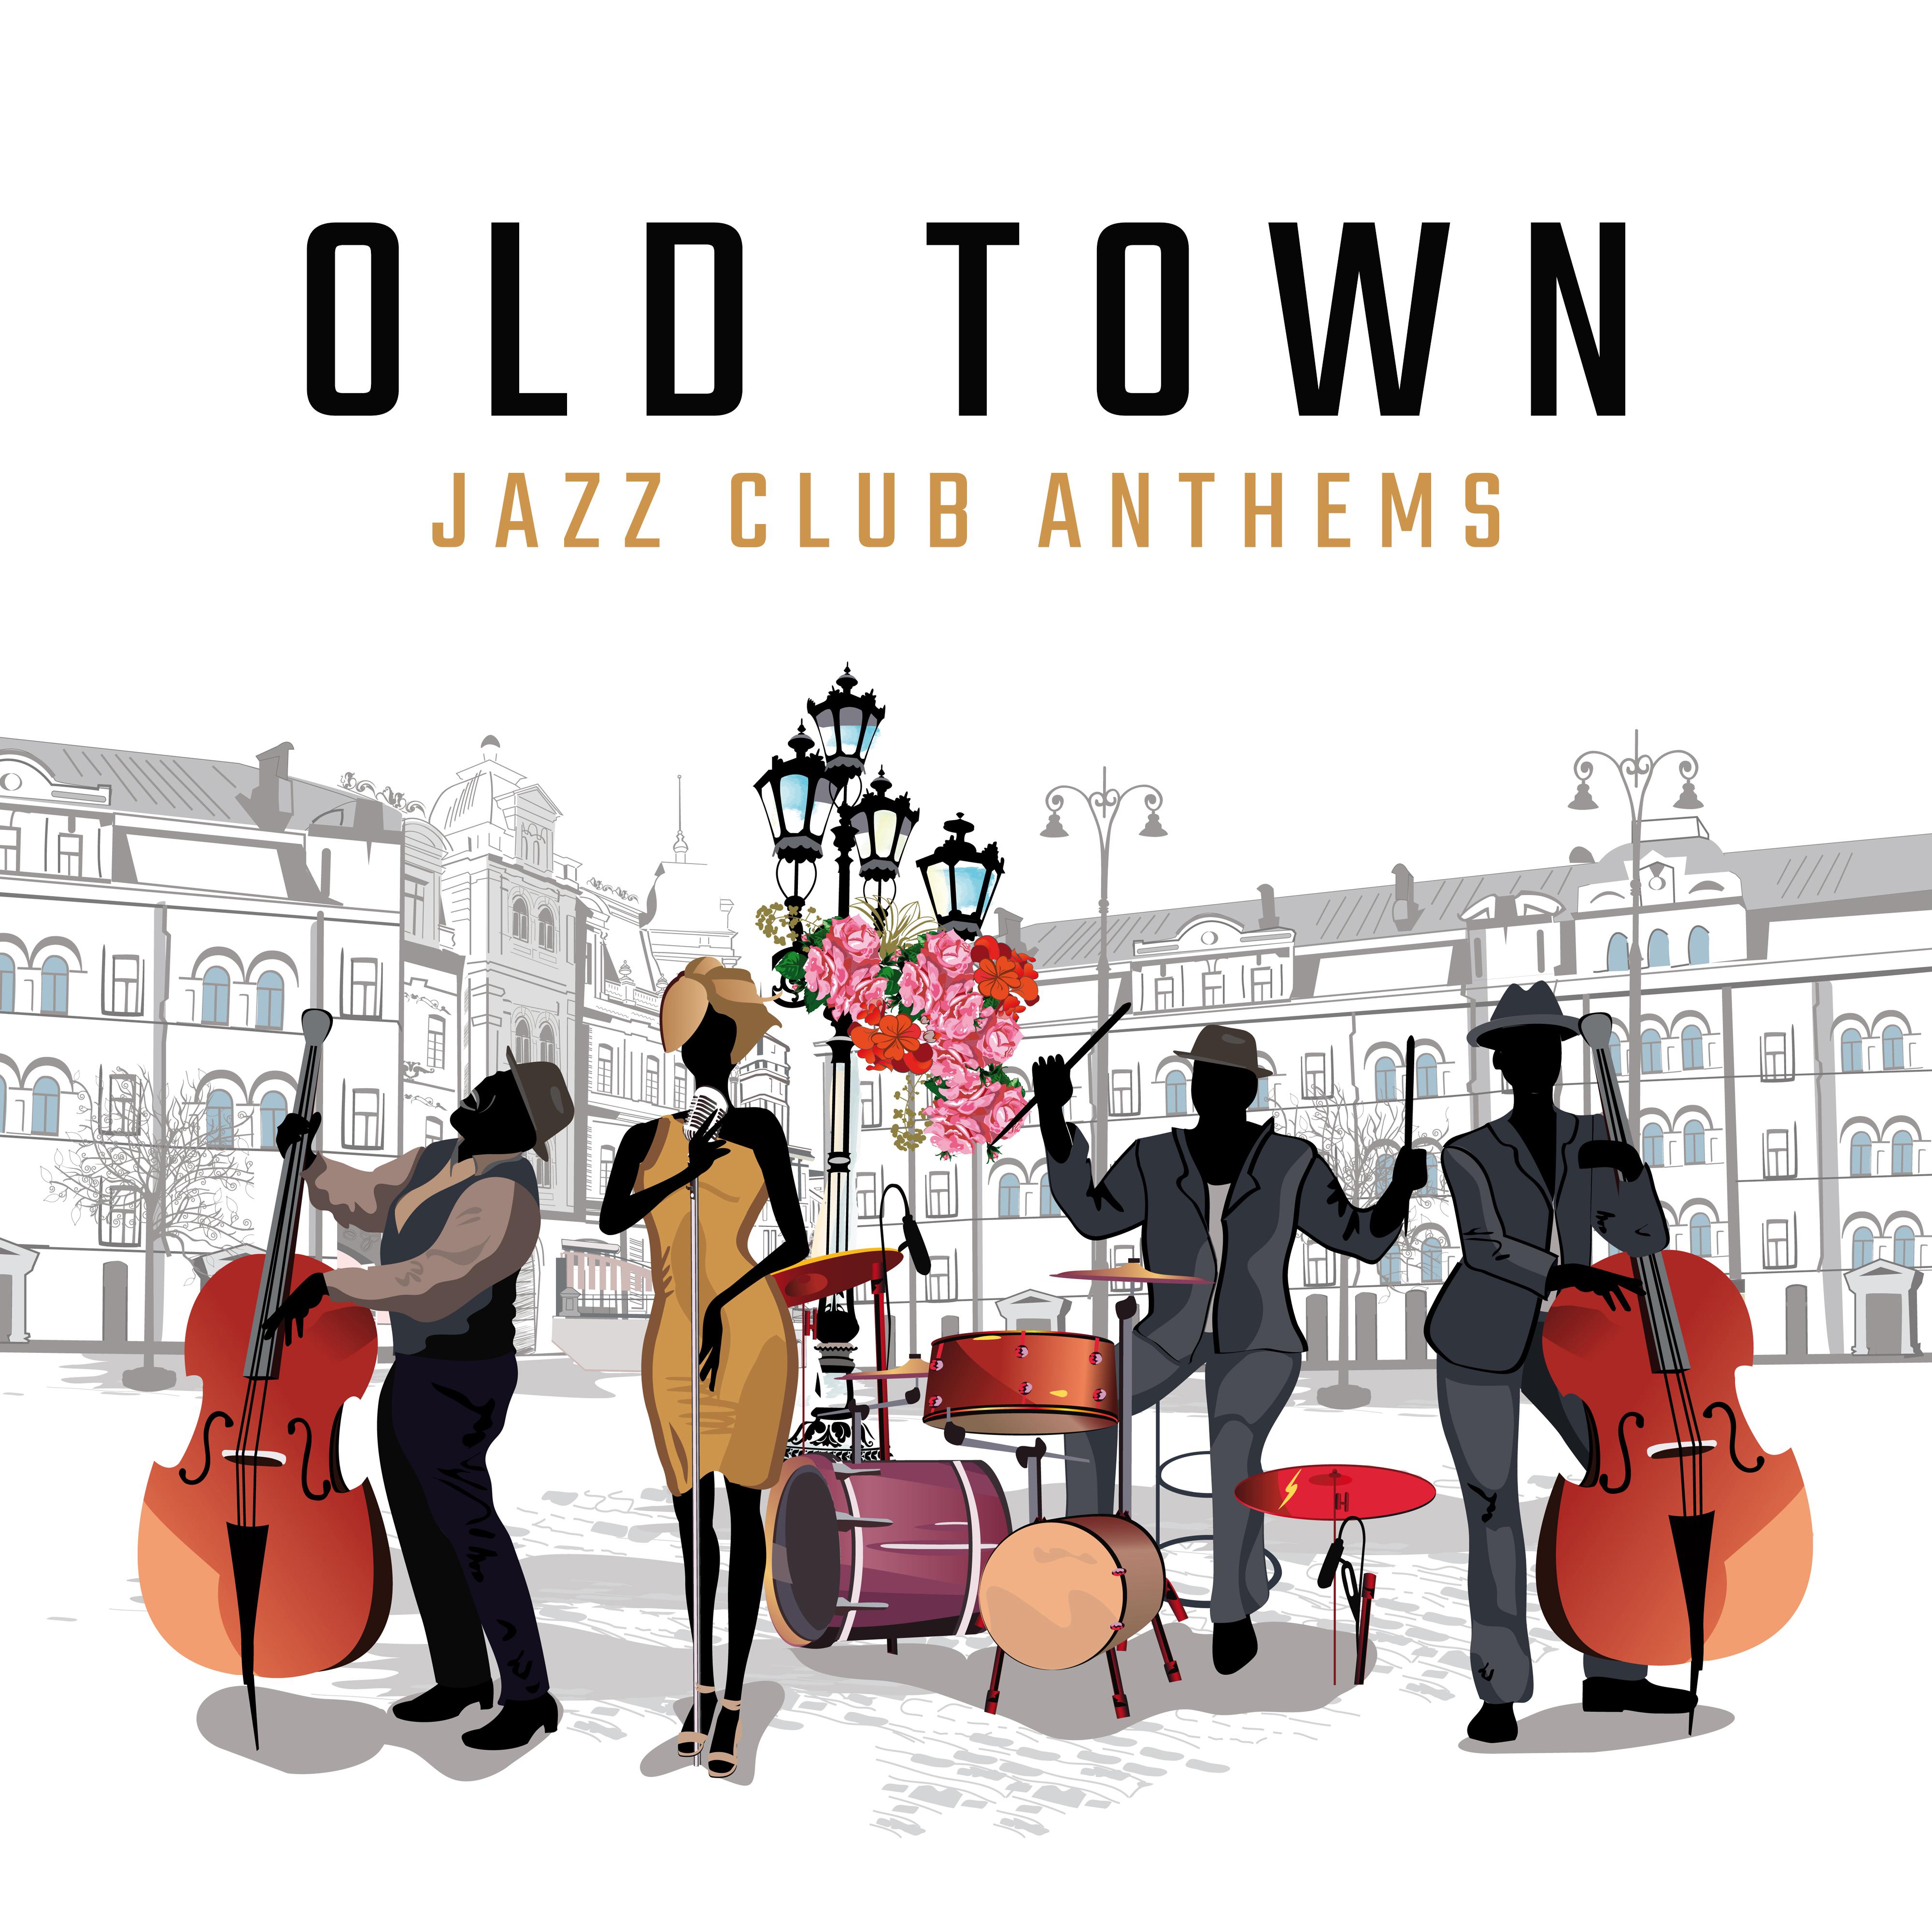 Old Town Jazz Club Anthems: Instrumental Smooth Jazz Songs 2019 Compilation